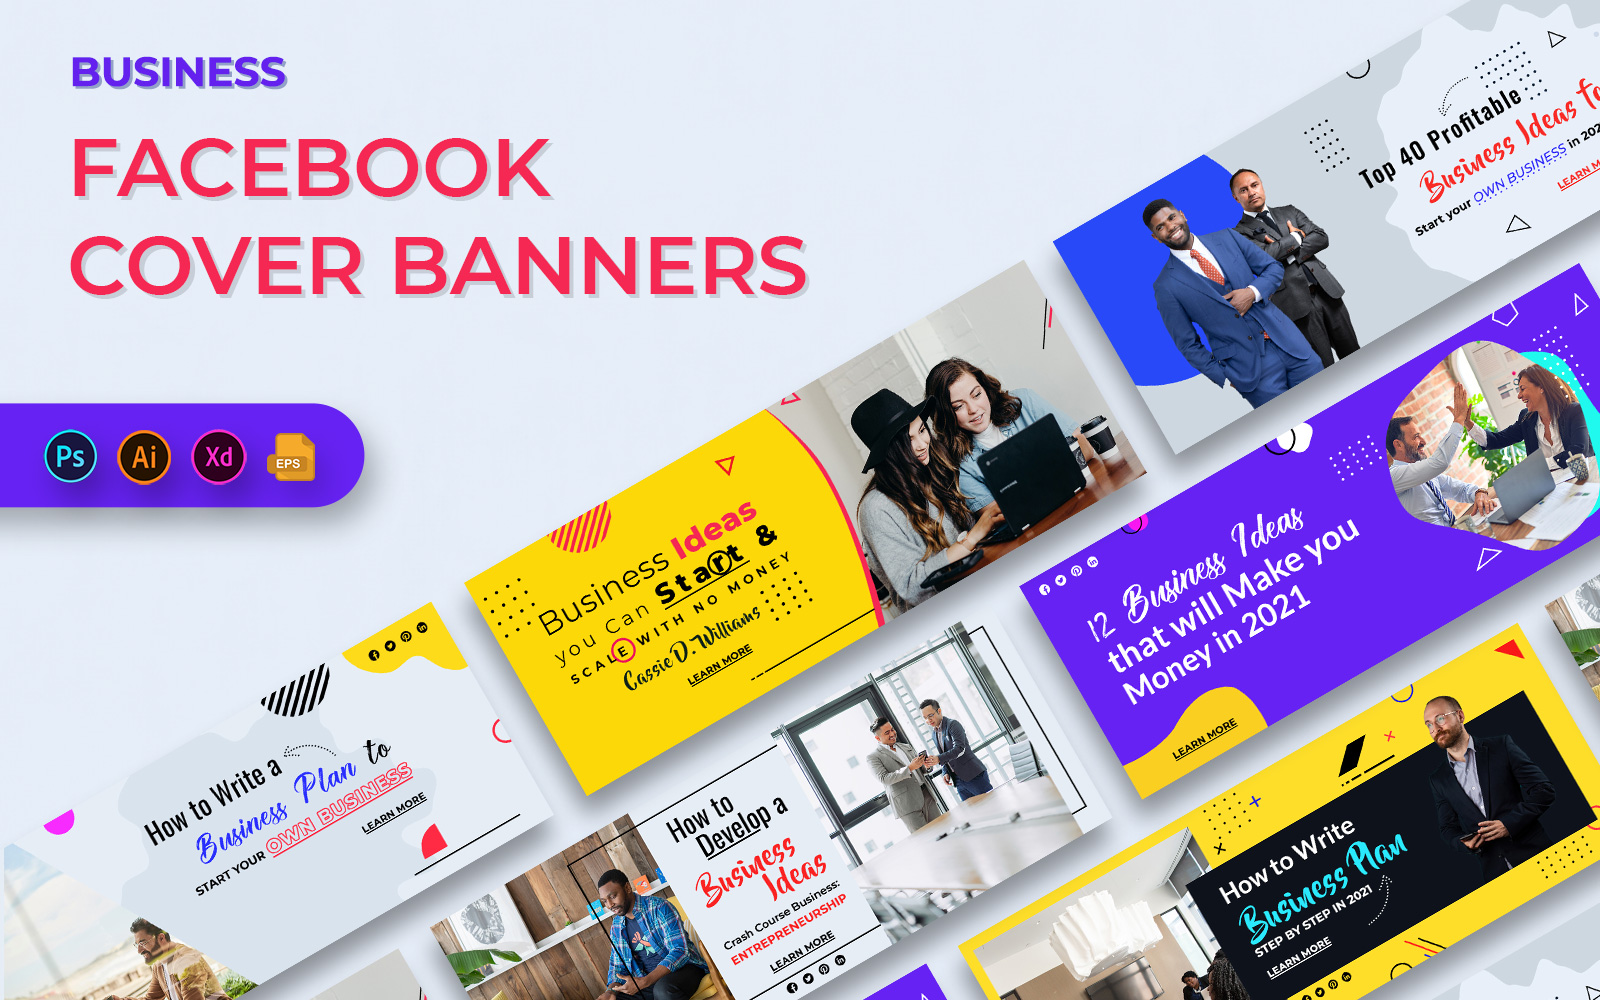 Business Facebook Cover Banner